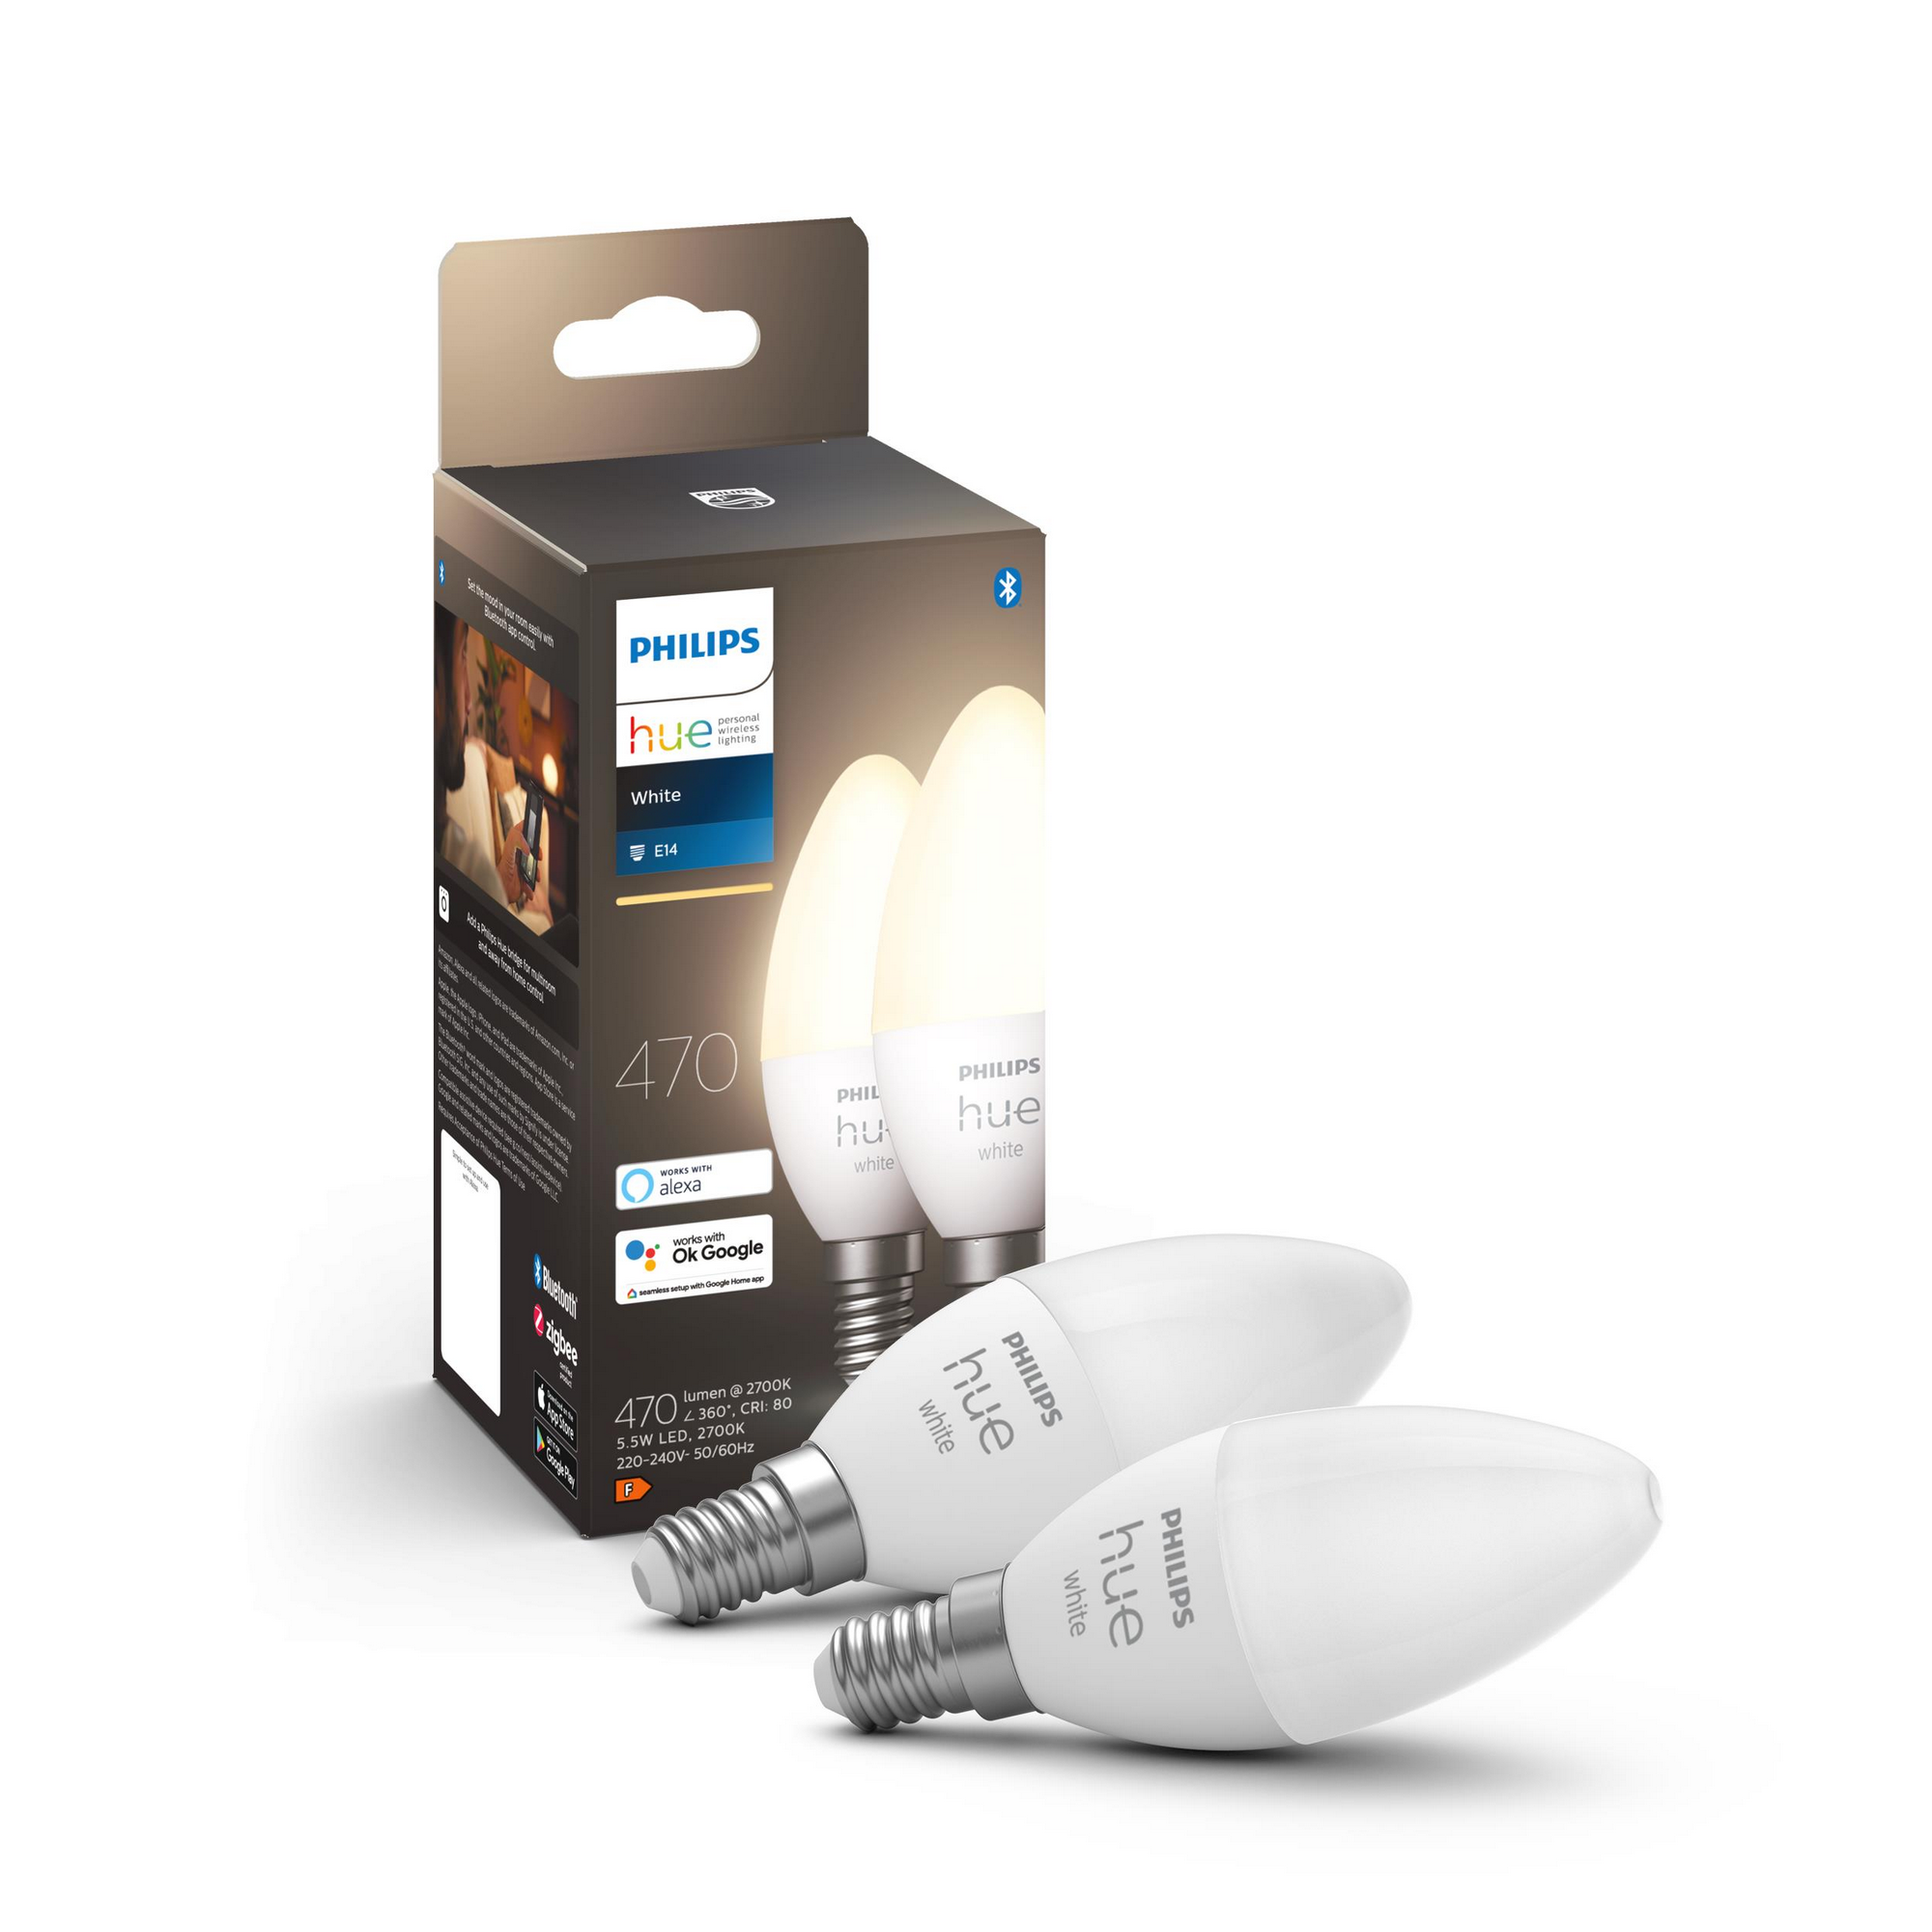 LED-Lampe 'Hue White' E14 5,5 W, 2er-Pack + product picture